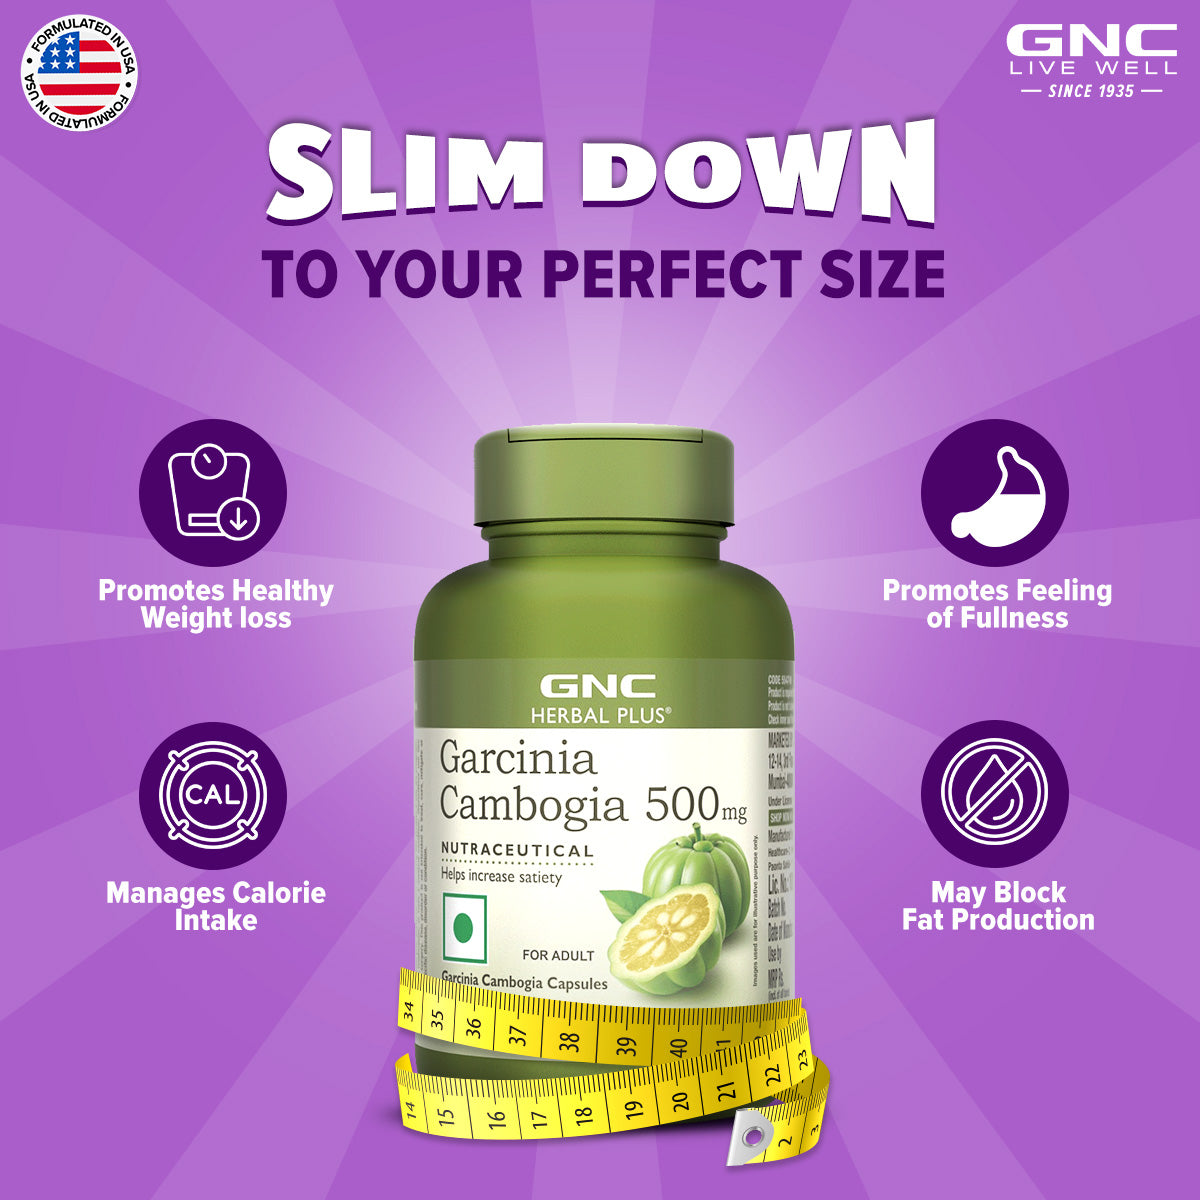 GNC Herbal Plus Garcinia Cambogia - Controls Appetite for Healthy Weight Loss